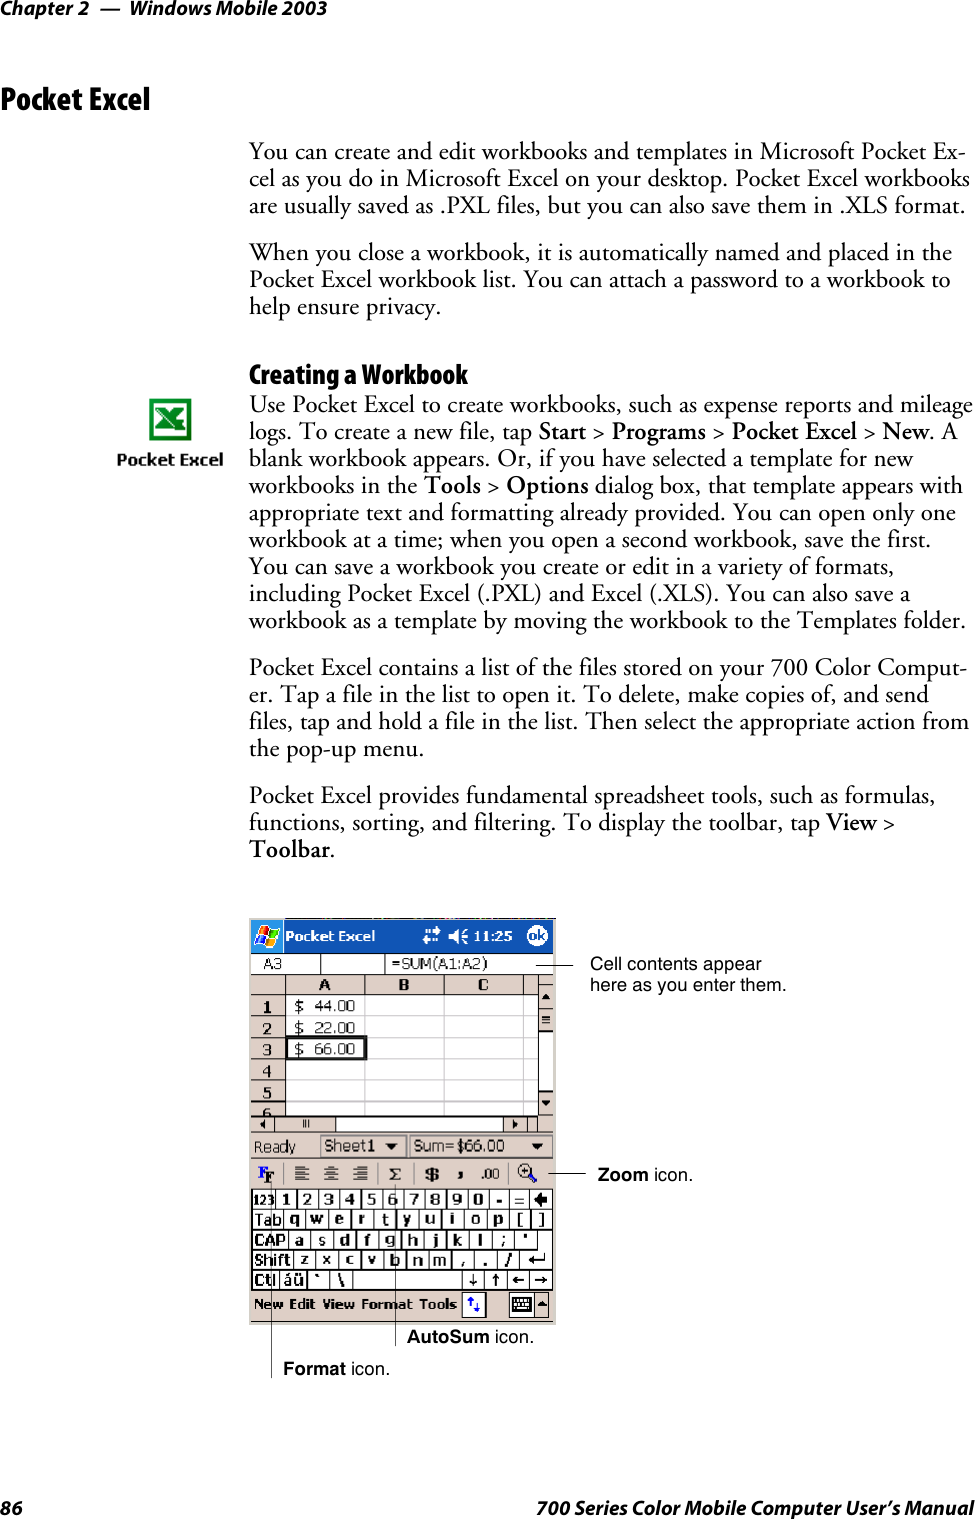 Windows Mobile 2003Chapter —286 700 Series Color Mobile Computer User’s ManualPocket ExcelYou can create and edit workbooks and templates in Microsoft Pocket Ex-cel as you do in Microsoft Excel on your desktop. Pocket Excel workbooksare usually saved as .PXL files, but you can also save them in .XLS format.When you close a workbook, it is automatically named and placed in thePocket Excel workbook list. You can attach a password to a workbook tohelp ensure privacy.Creating a WorkbookUse Pocket Excel to create workbooks, such as expense reports and mileagelogs. To create a new file, tap Start &gt;Programs &gt;Pocket Excel &gt;New.Ablank workbook appears. Or, if you have selected a template for newworkbooks in the Tools &gt;Options dialog box, that template appears withappropriate text and formatting already provided. You can open only oneworkbook at a time; when you open a second workbook, save the first.You can save a workbook you create or edit in a variety of formats,including Pocket Excel (.PXL) and Excel (.XLS). You can also save aworkbook as a template by moving the workbook to the Templates folder.Pocket Excel contains a list of the files stored on your 700 Color Comput-er. Tap a file in the list to open it. To delete, make copies of, and sendfiles, tap and hold a file in the list. Then select the appropriate action fromthe pop-up menu.Pocket Excel provides fundamental spreadsheet tools, such as formulas,functions, sorting, and filtering. To display the toolbar, tap View &gt;Toolbar.Zoom icon.Format icon.AutoSum icon.Cell contents appearhere as you enter them.